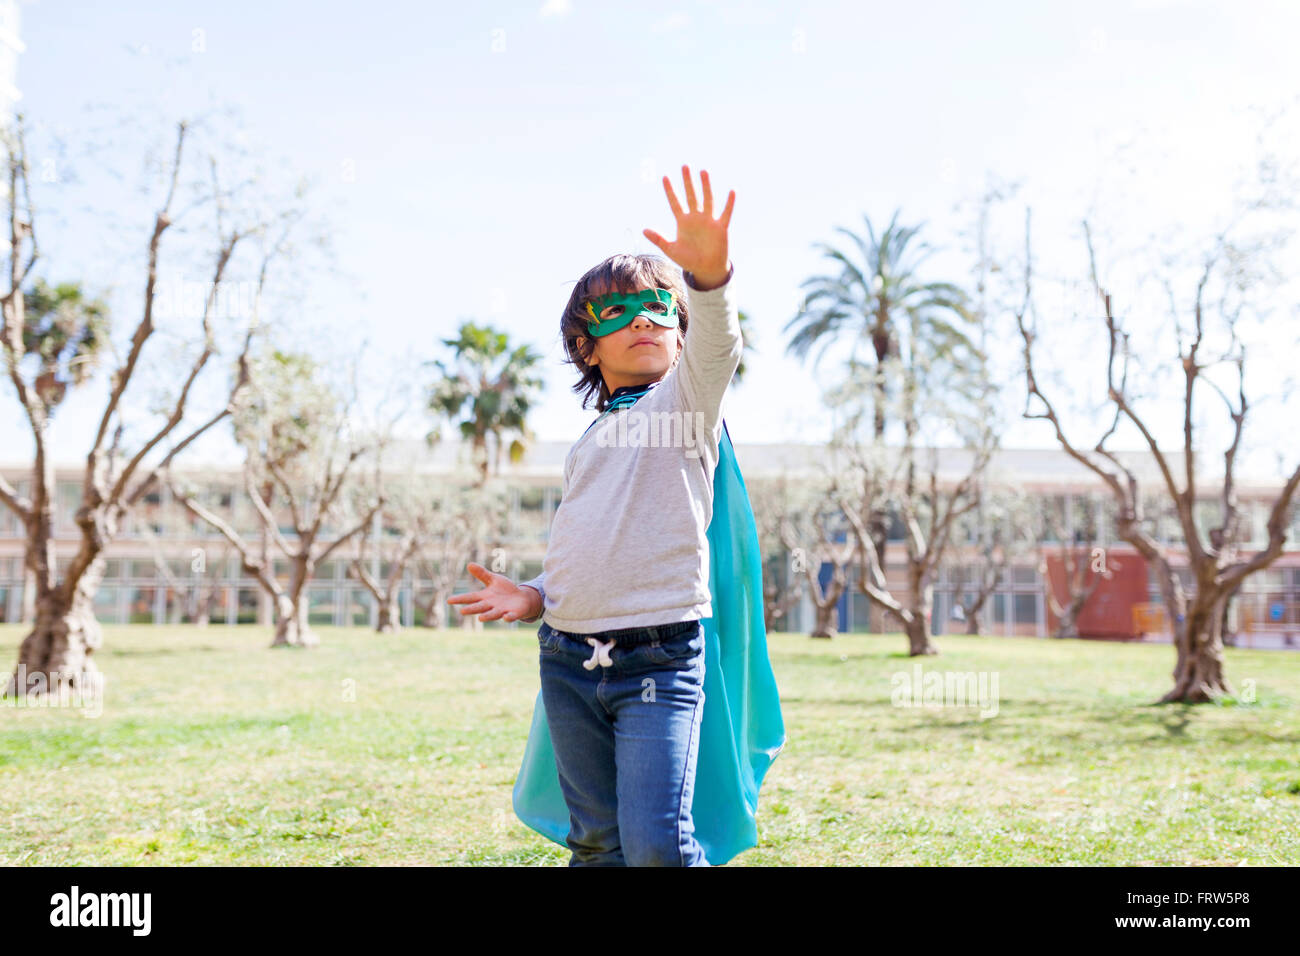 Little boy dressed up as a superhero posing on a meadow Stock Photo